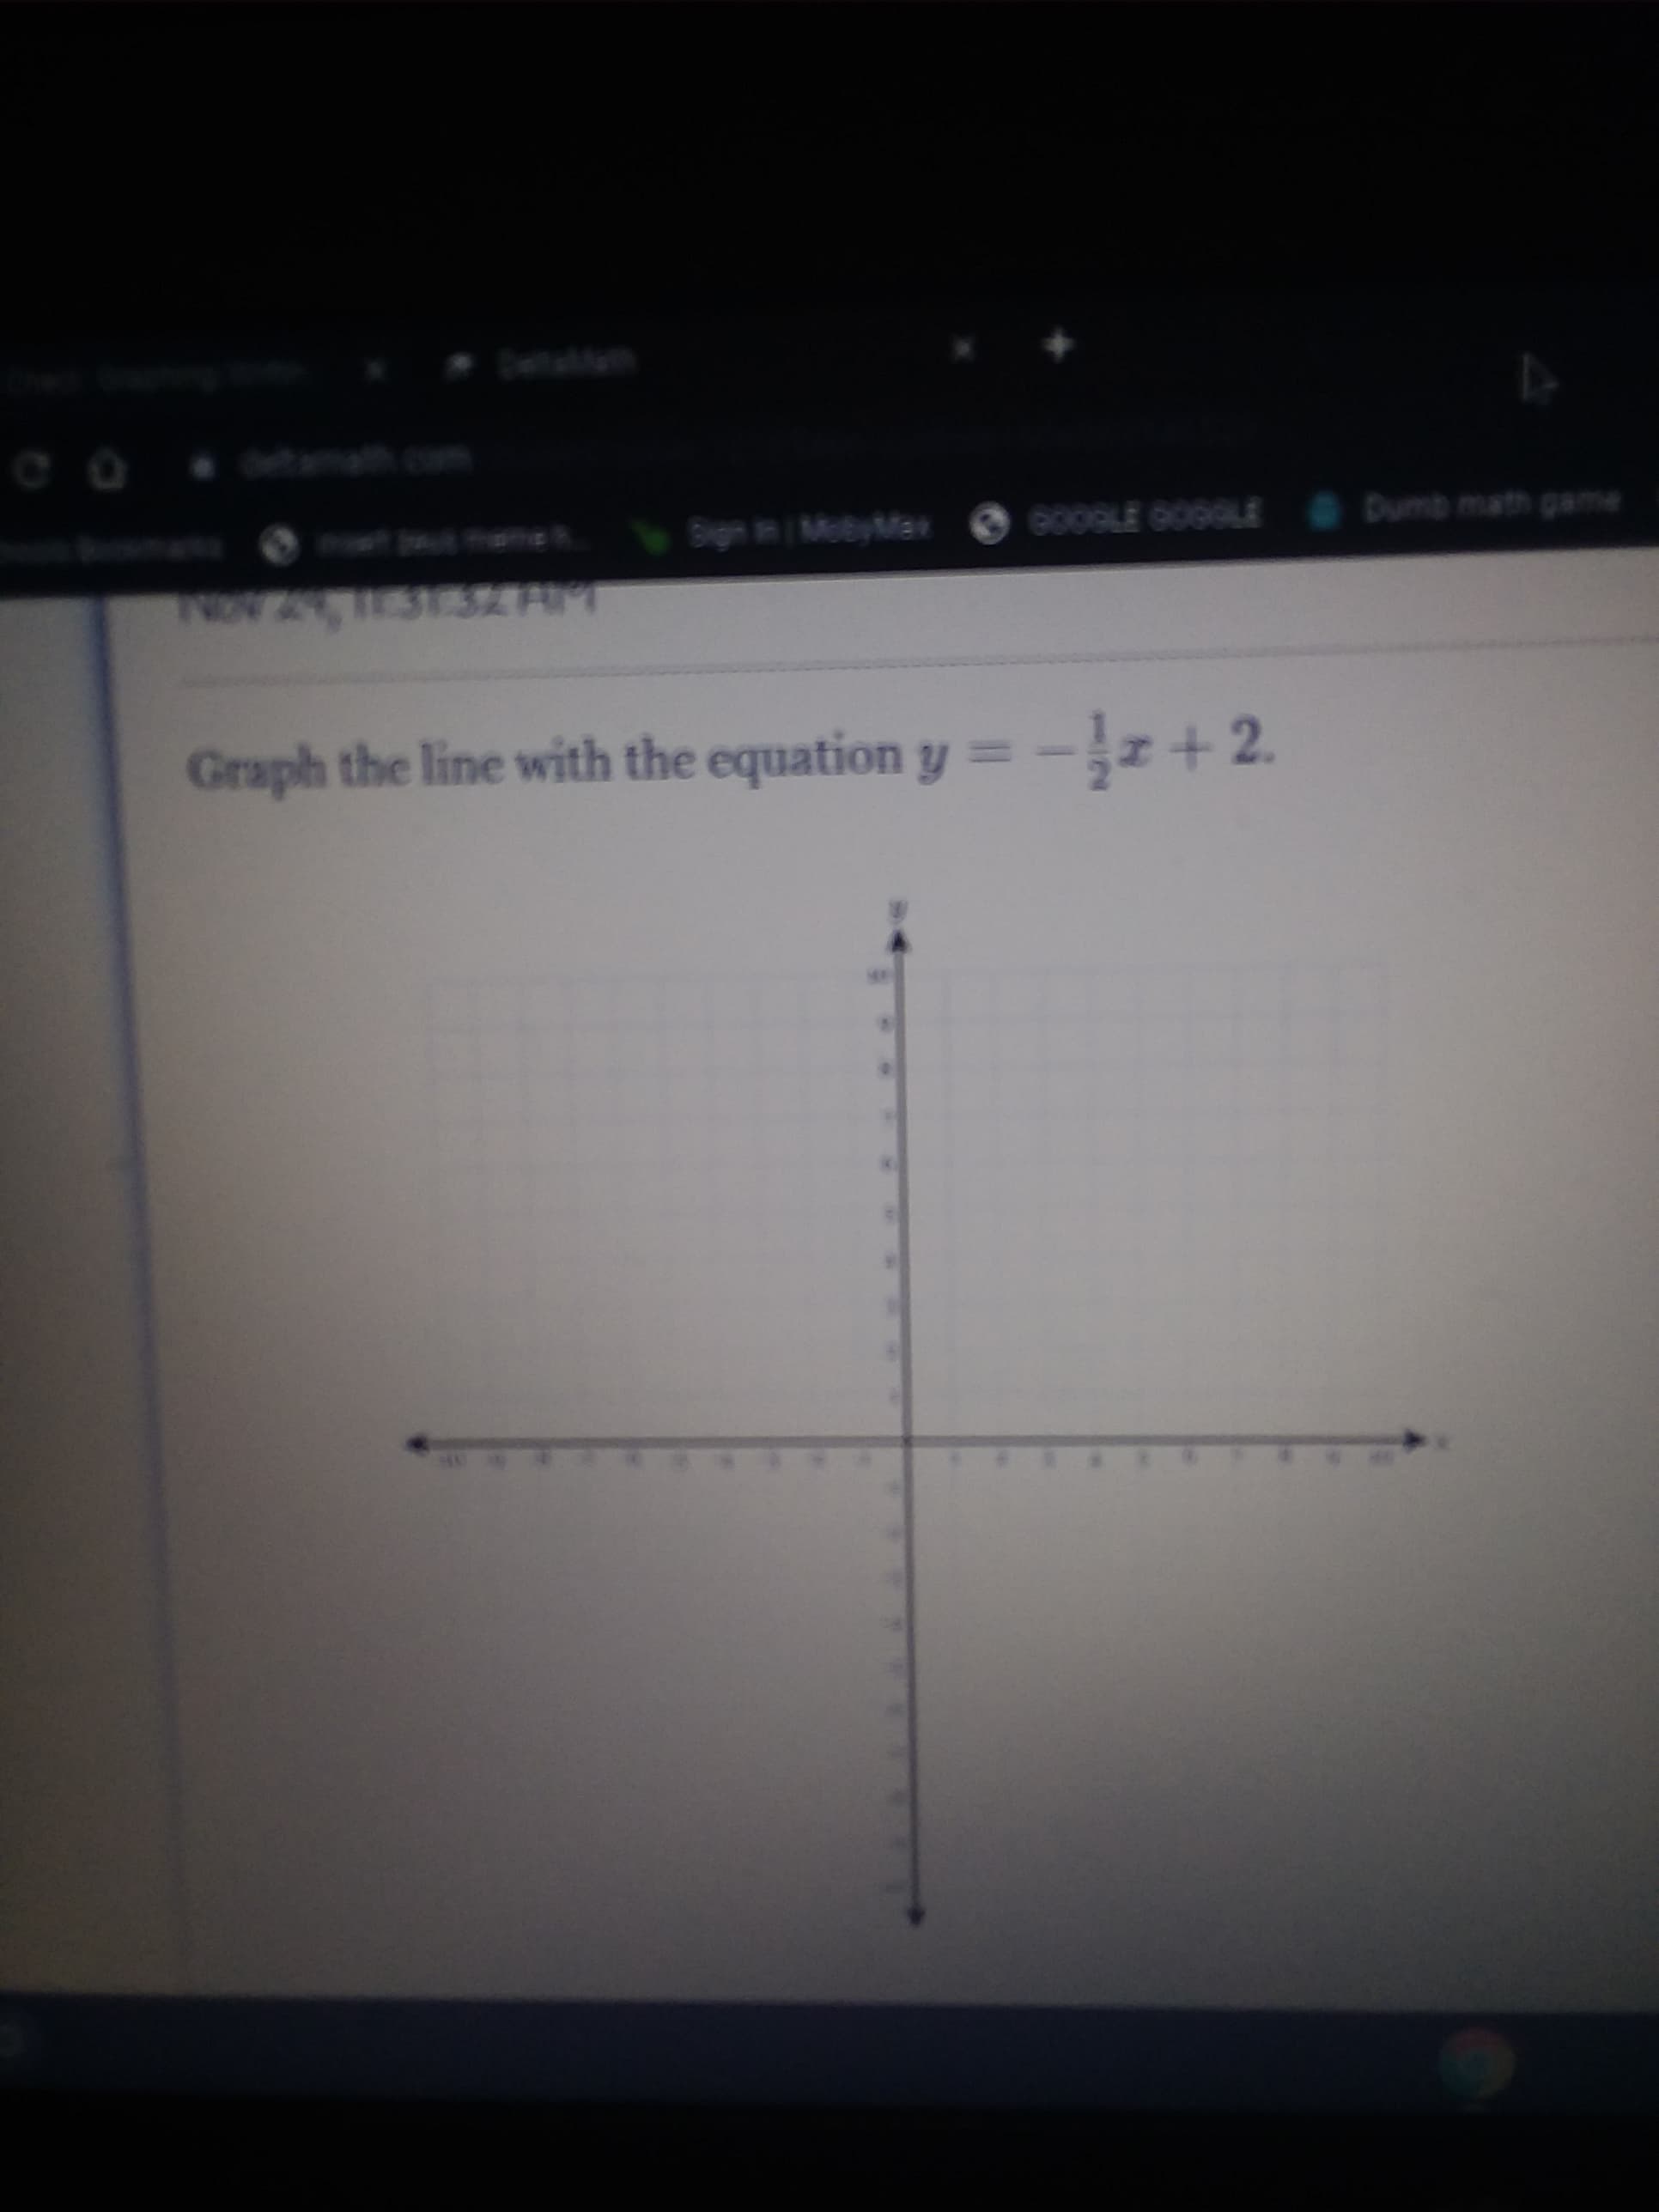 Graph the line with the equation y =
-+ 2.
